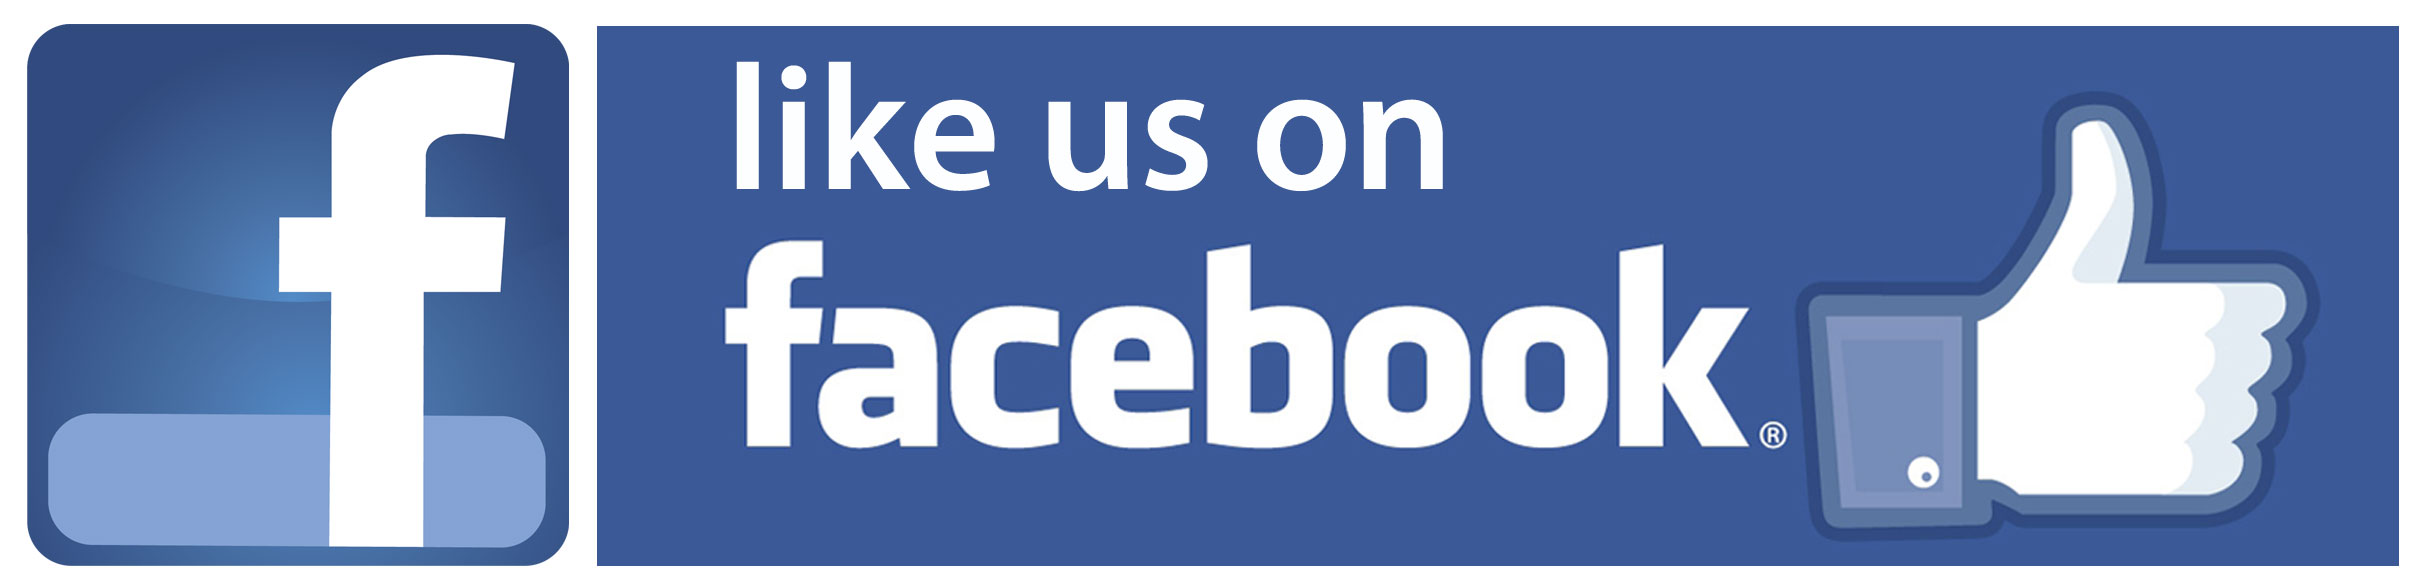 Become our Fans on Facebook and save money | Hotel Villa Sirina ...